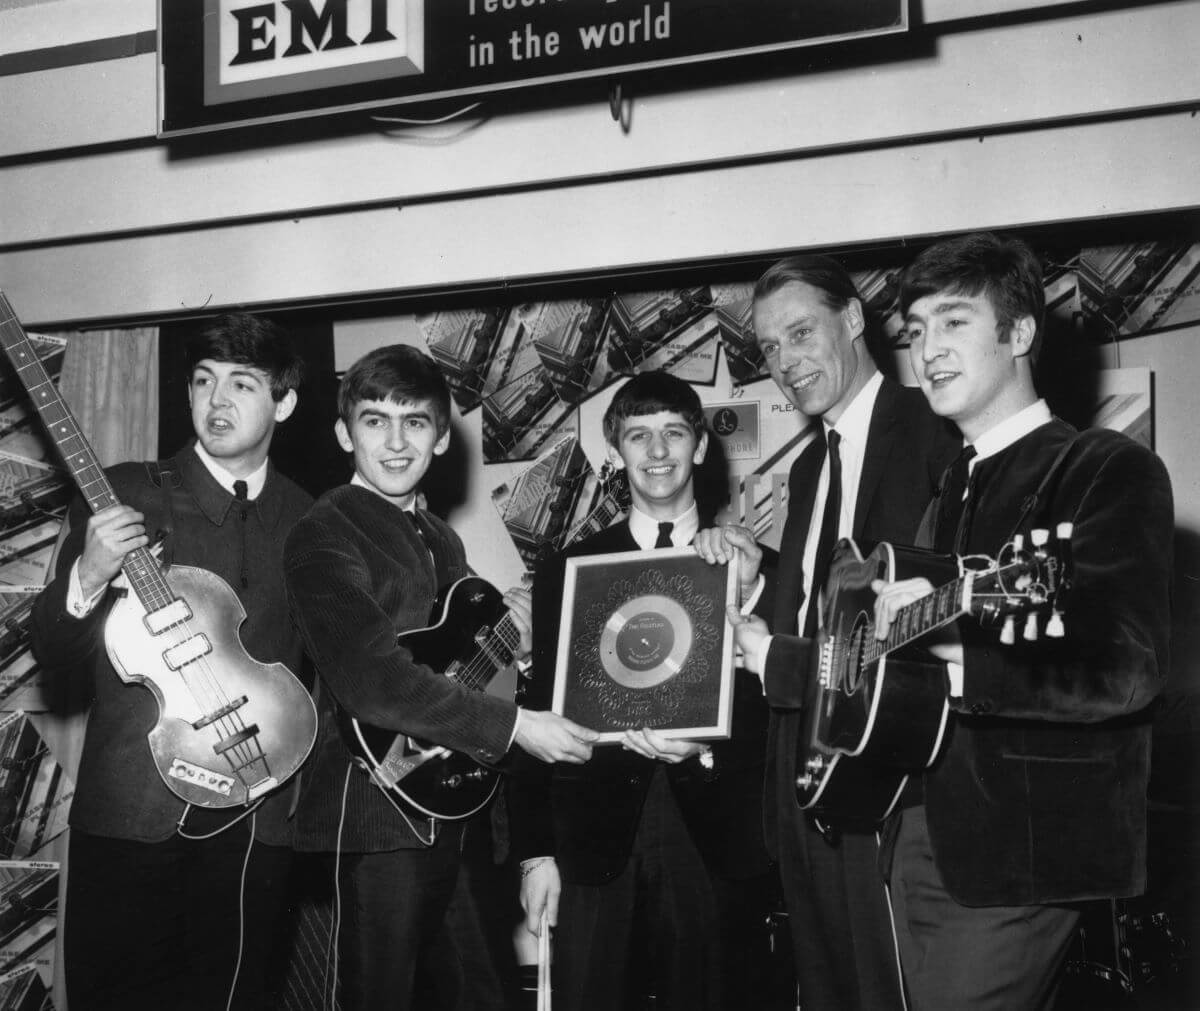 A black and white picture of Pal McCartney, George Harrison, Ringo Starr, George Martin, and John Lennon posing together. McCartney, Harrison, and Lennon have guitars and Starr holds a framed record.